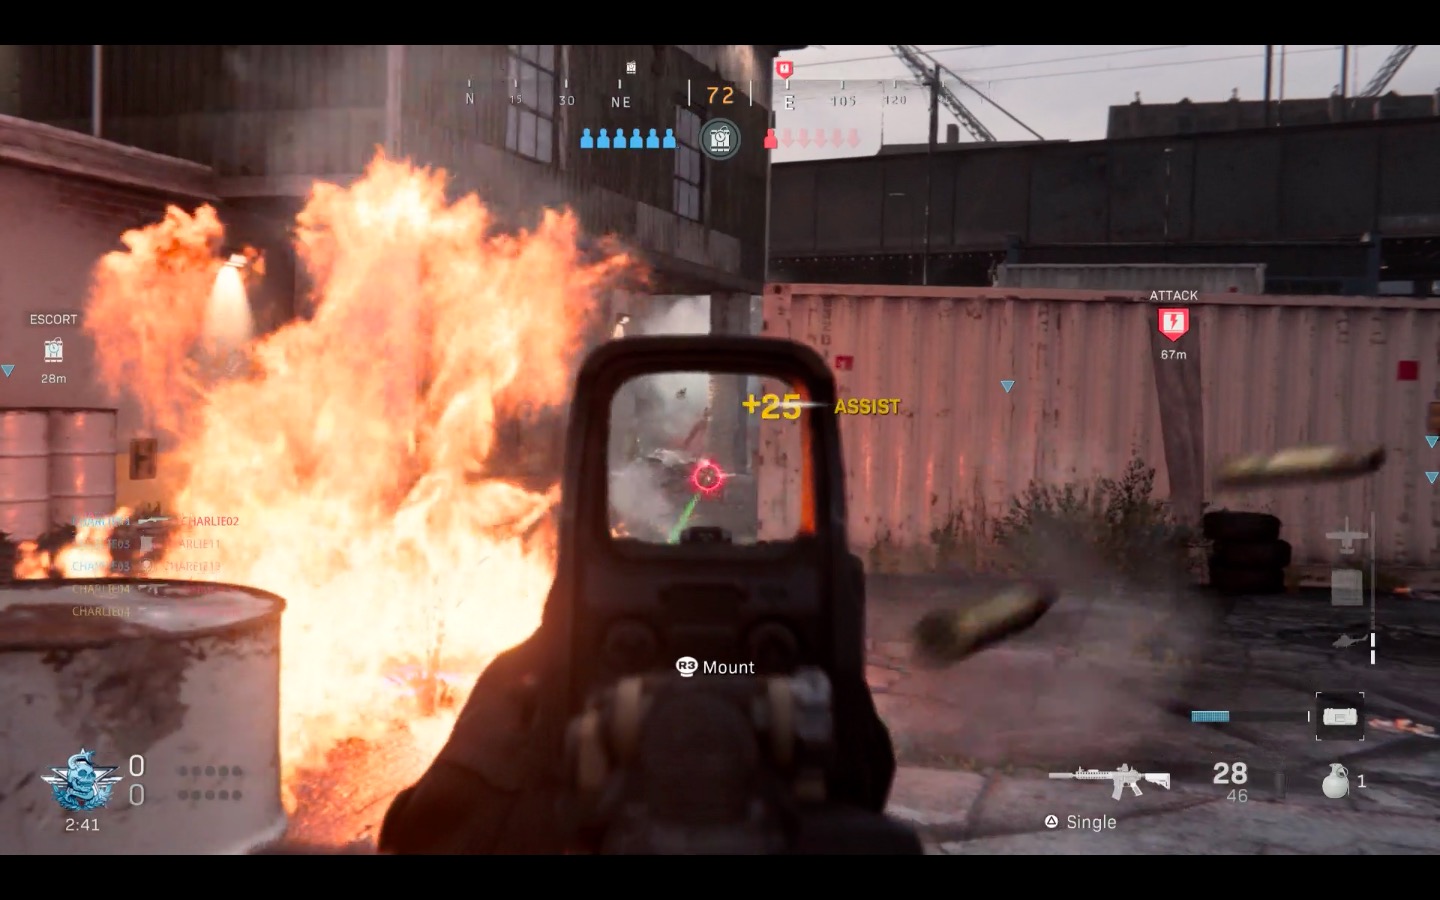 Impressions From the Call of Duty: Modern Warfare 2 Multiplayer